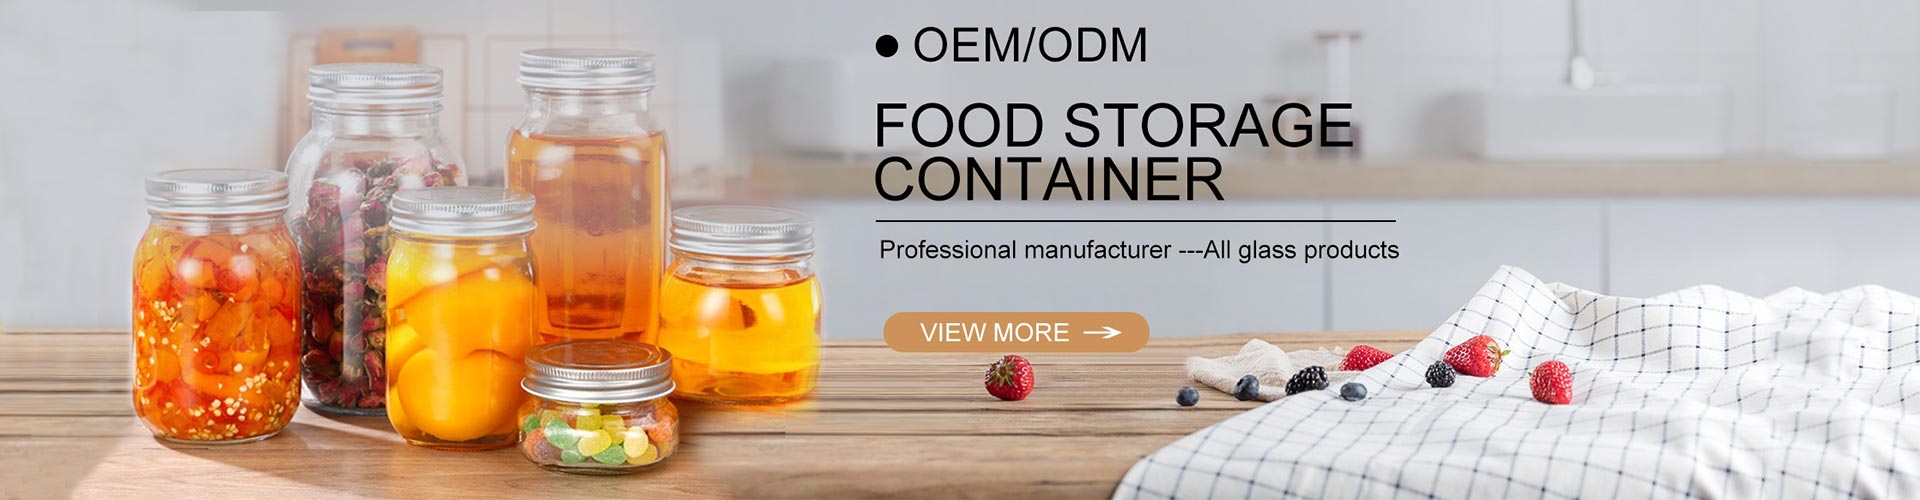 Glass Food Containers